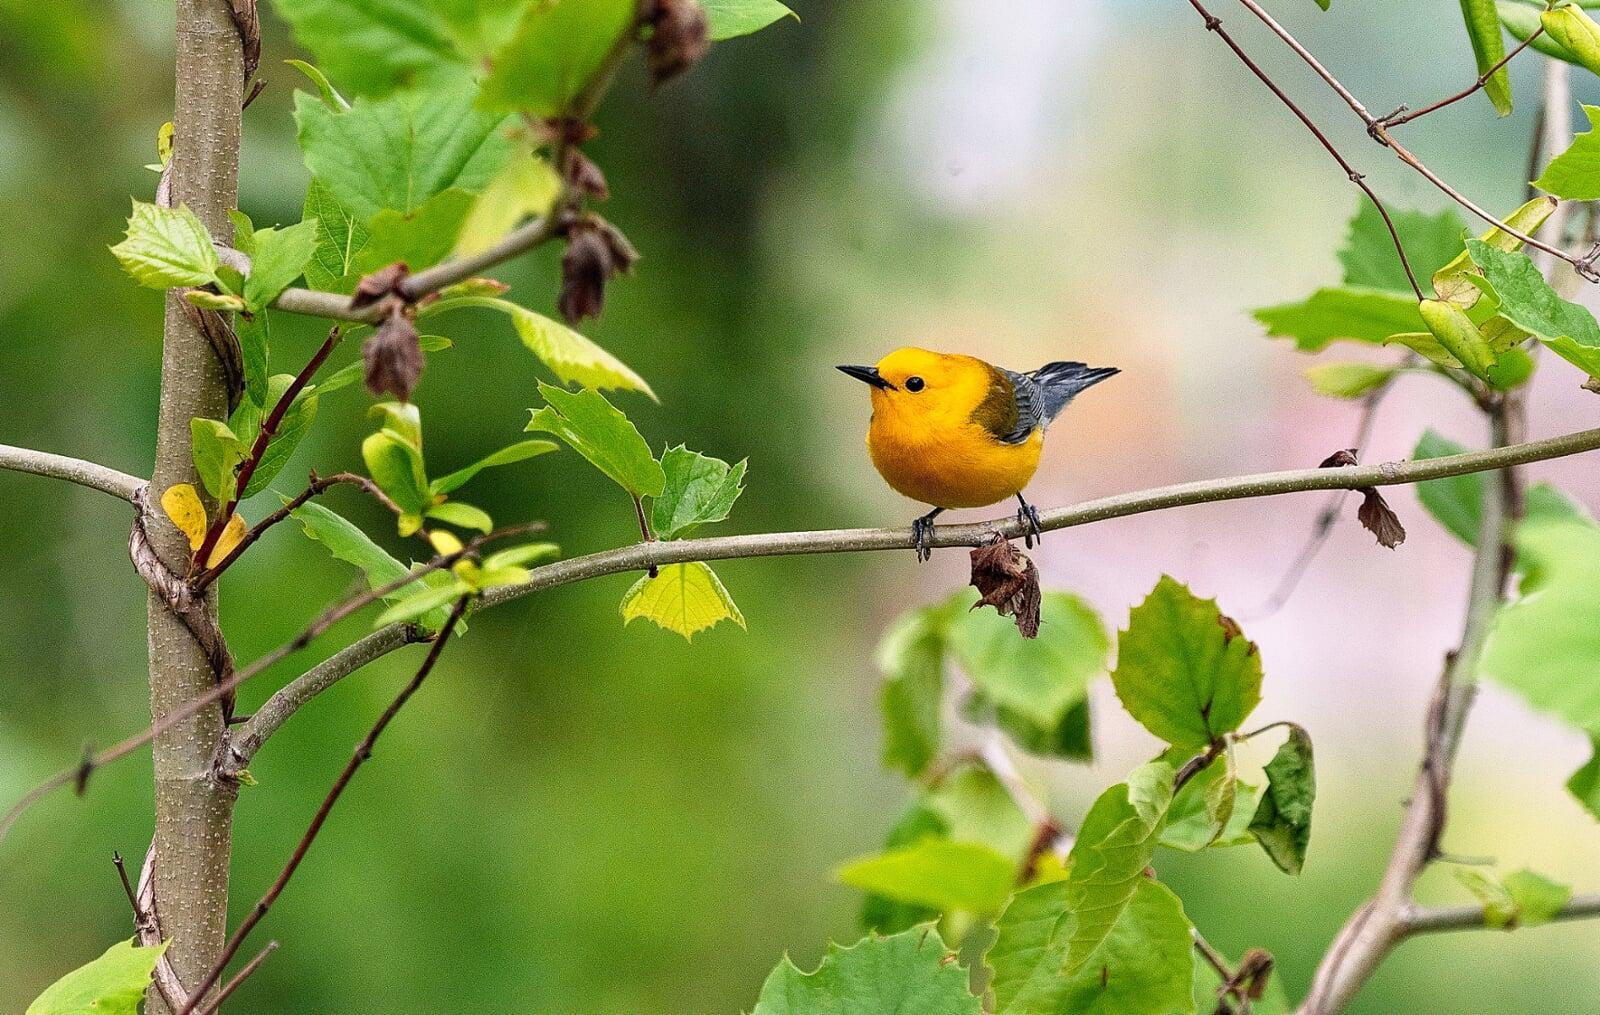 An Amazing Experience With The Prothonotary Warbler